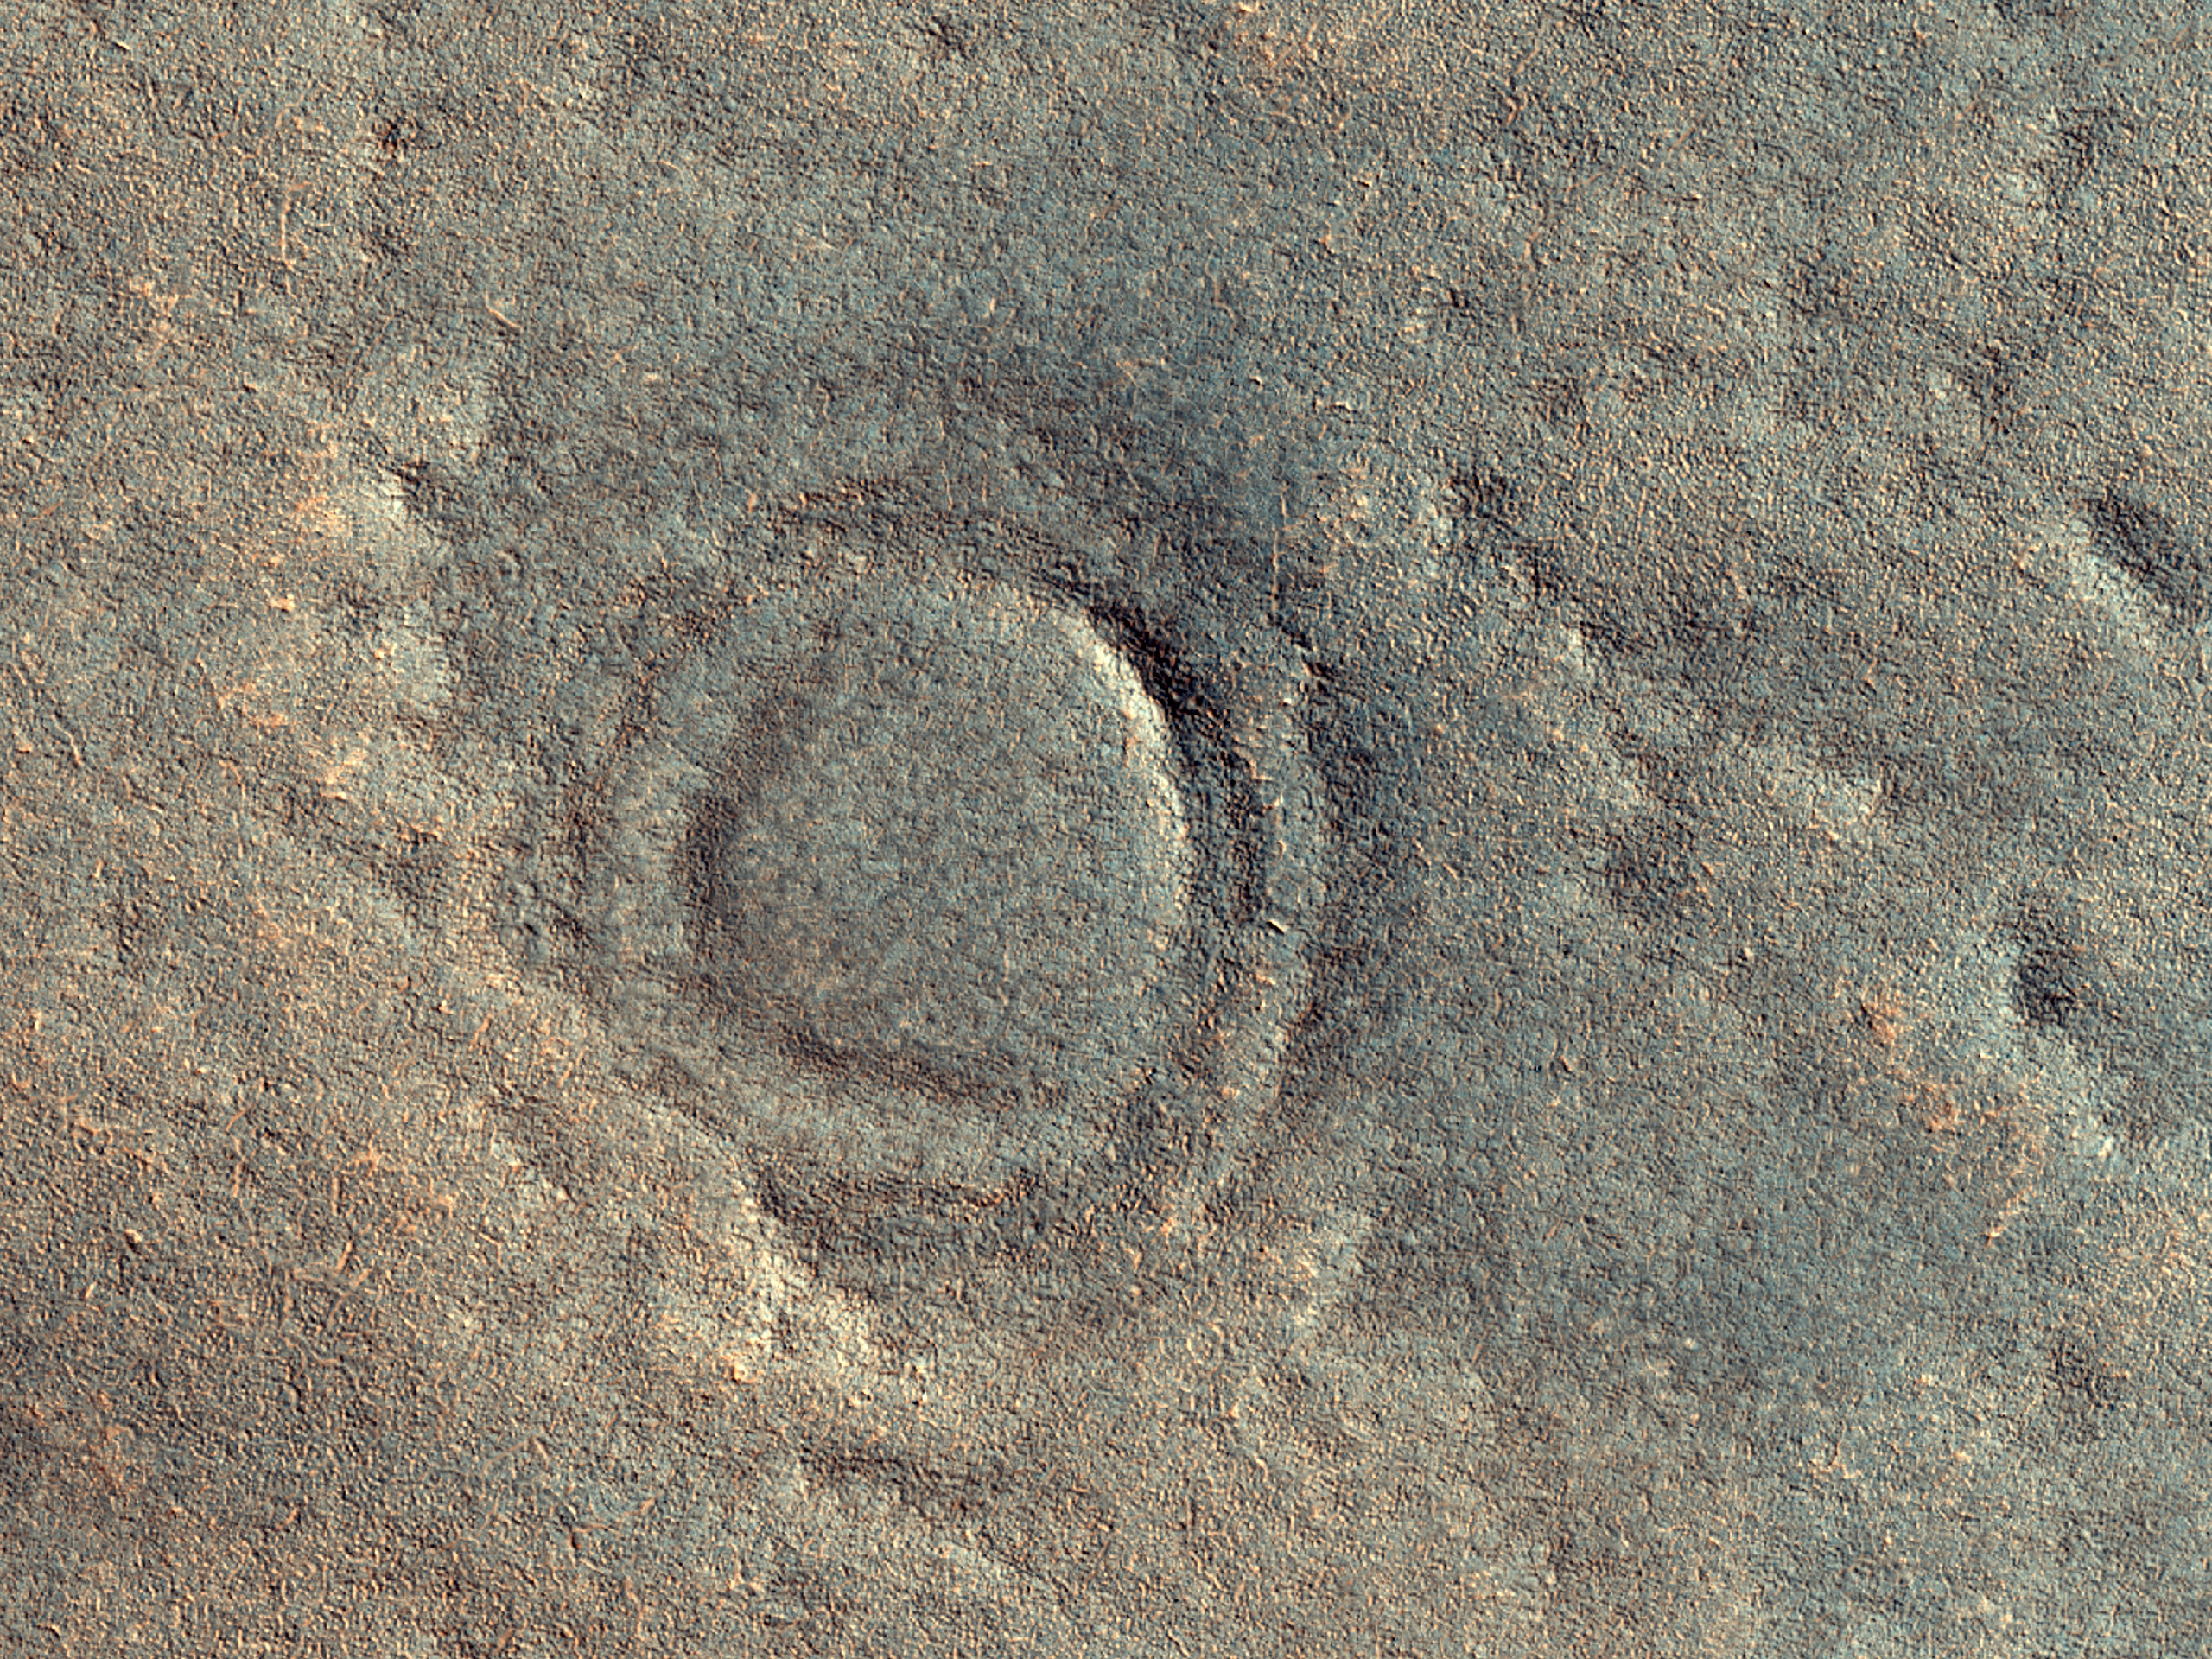 Modification of Ringed Crater